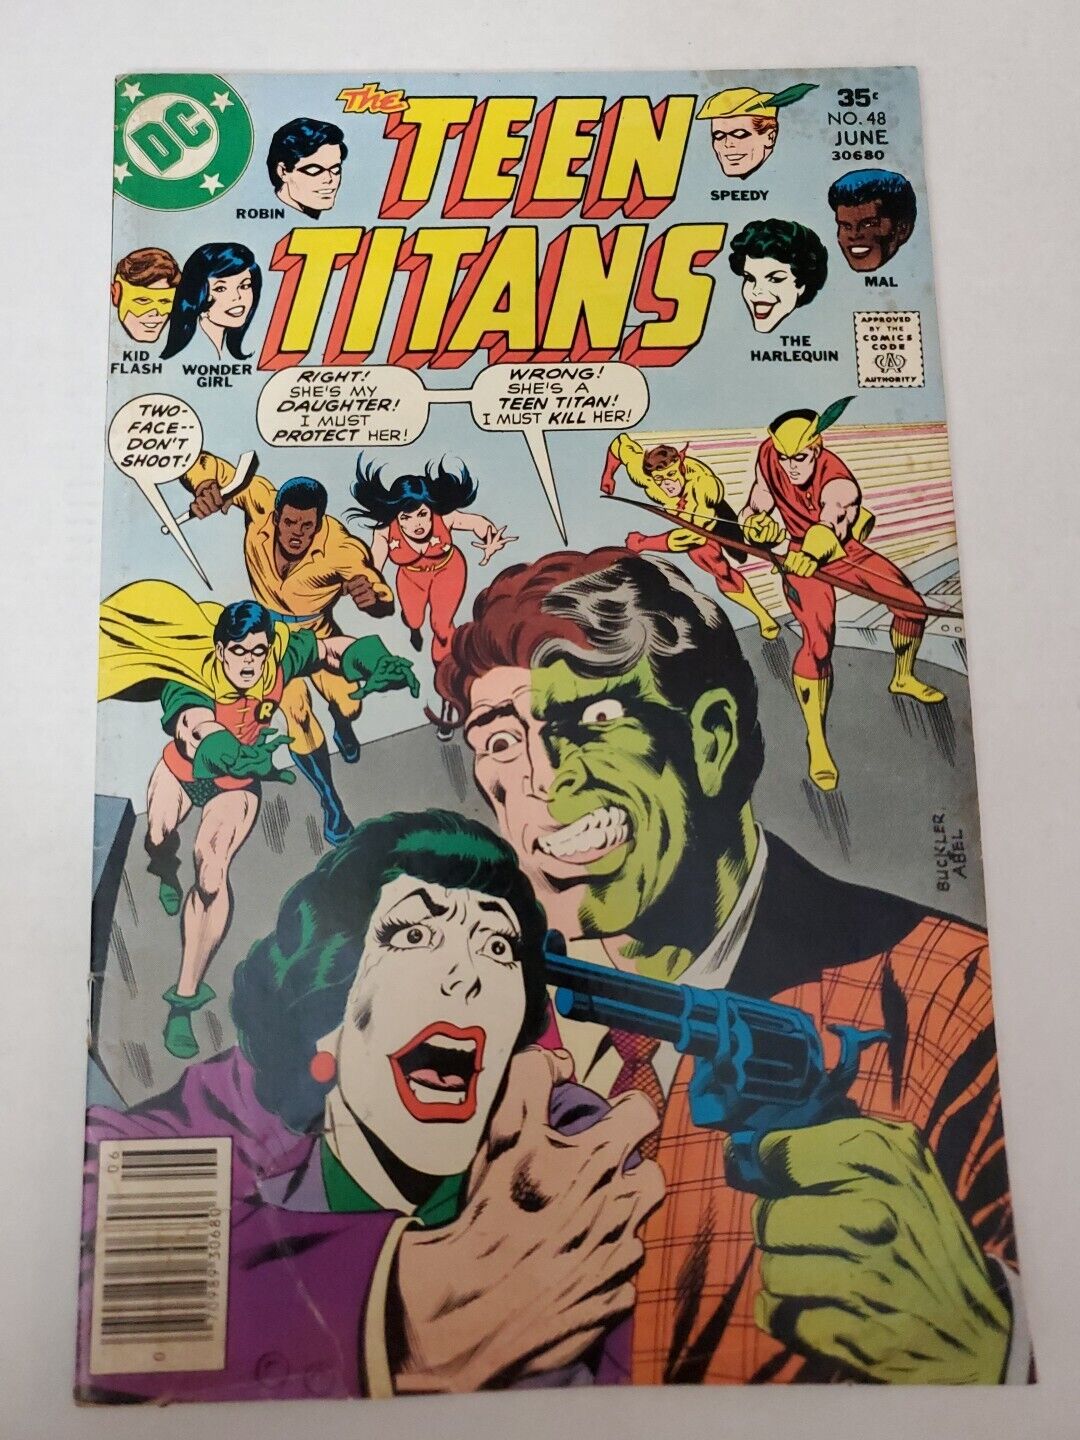 TEEN TITANS # 48 DC COMICS 1977 HARLEQUIN FIRST APPEARANCE VERY GOOD TO FINE